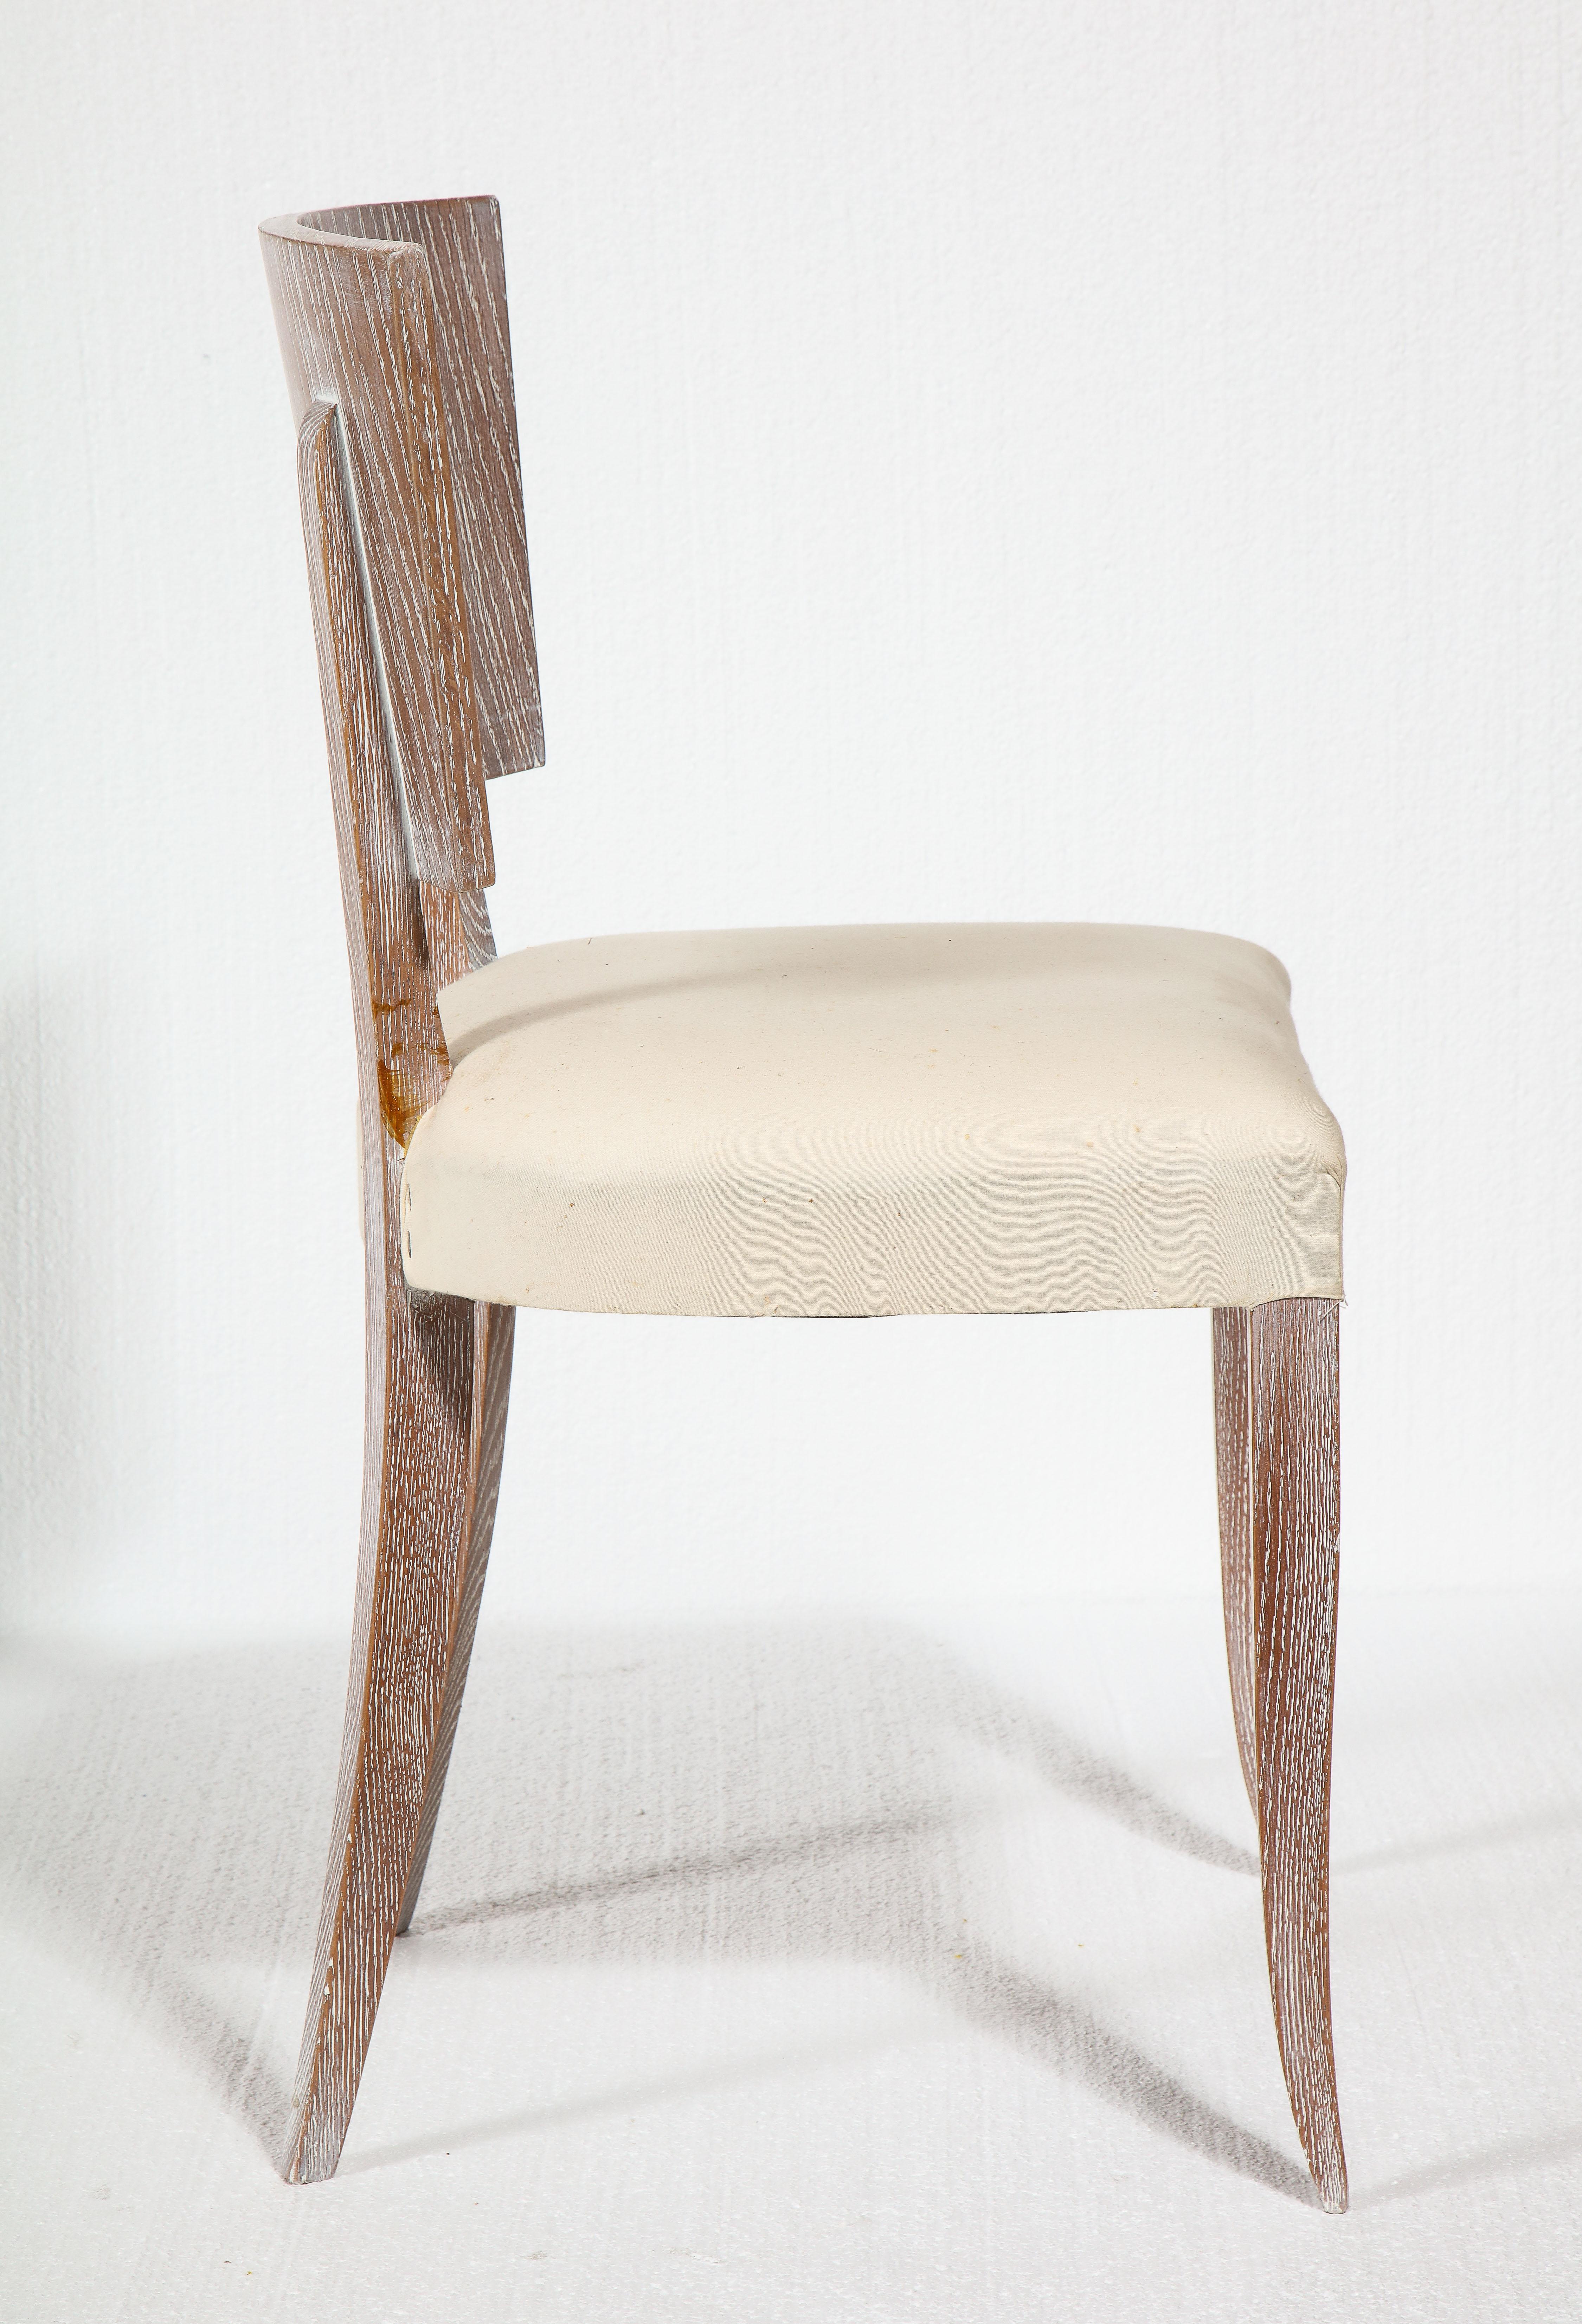 6 French Art Deco Cerused Oak White Dining Chairs, 1930s For Sale 1